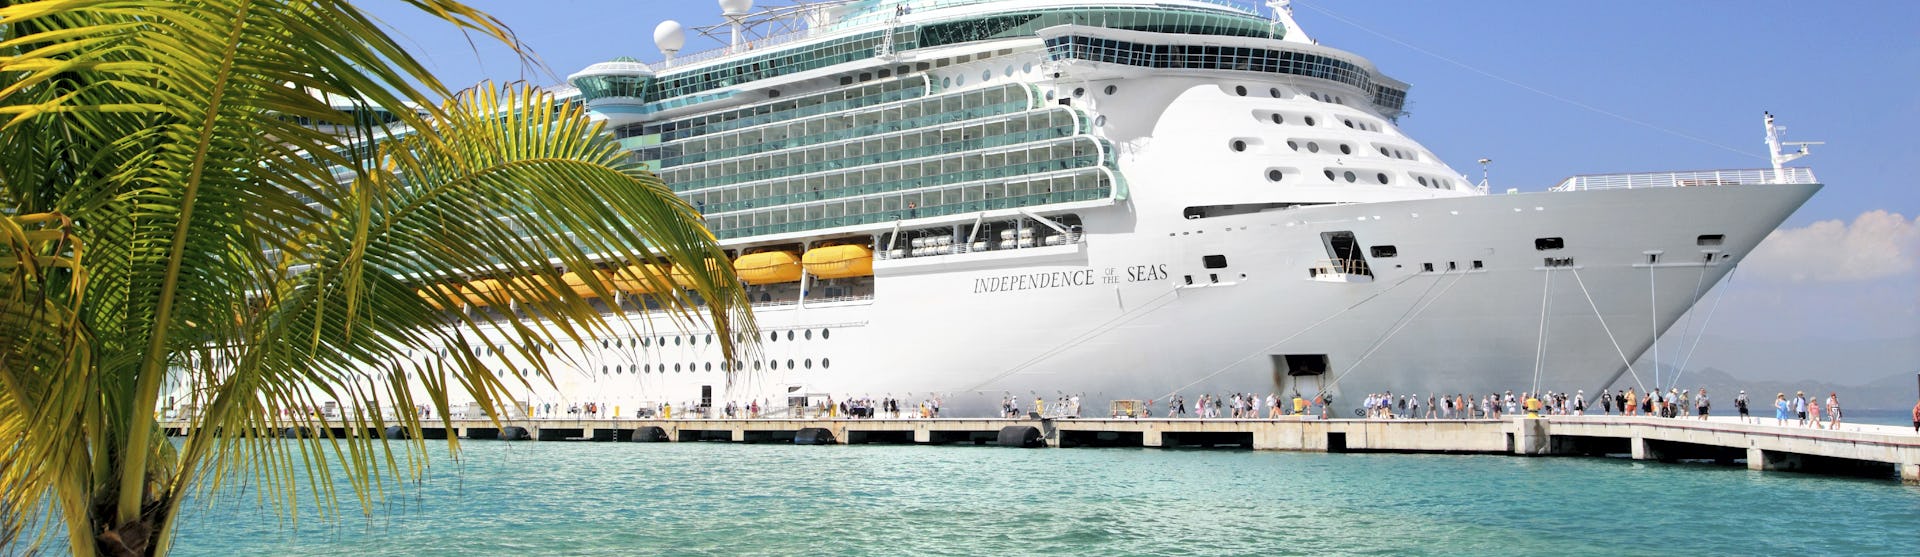 Independence of the Seas - Royal Caribbean 